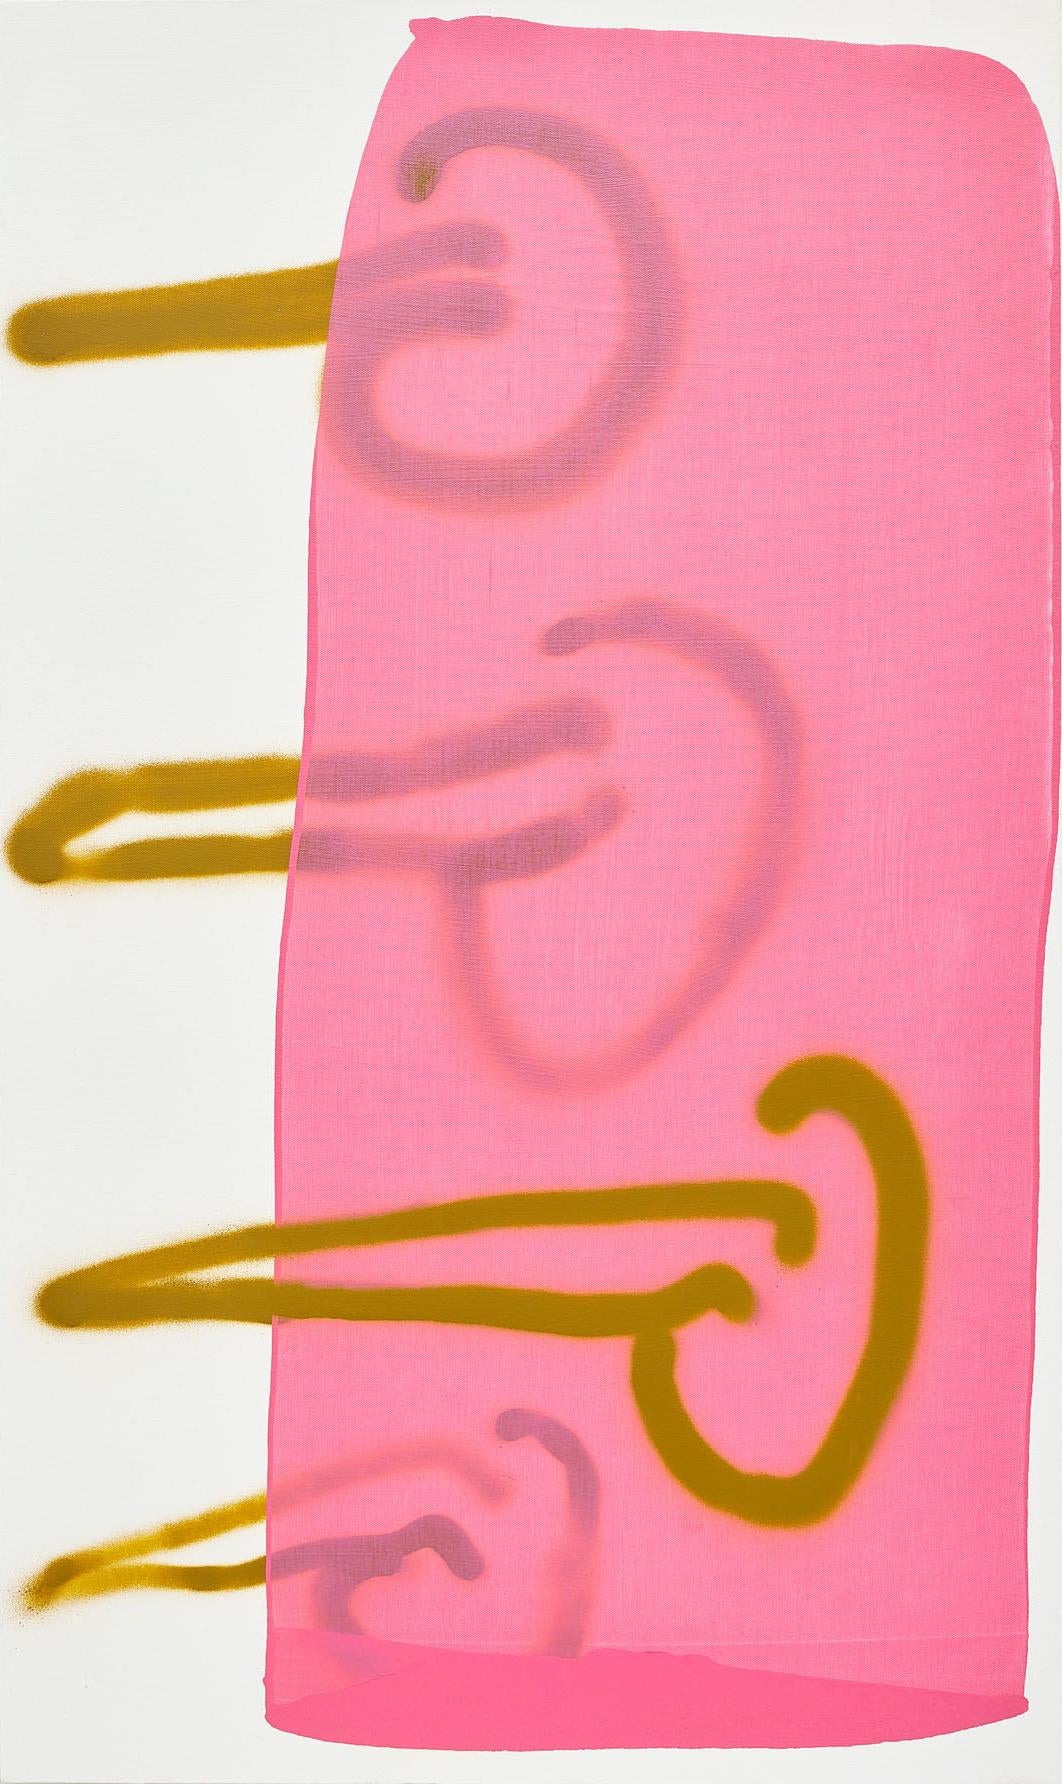 Mel Reese Abstract Painting - "Misogyny", contemporary political pink & ochre abstract acrylic & spray paint